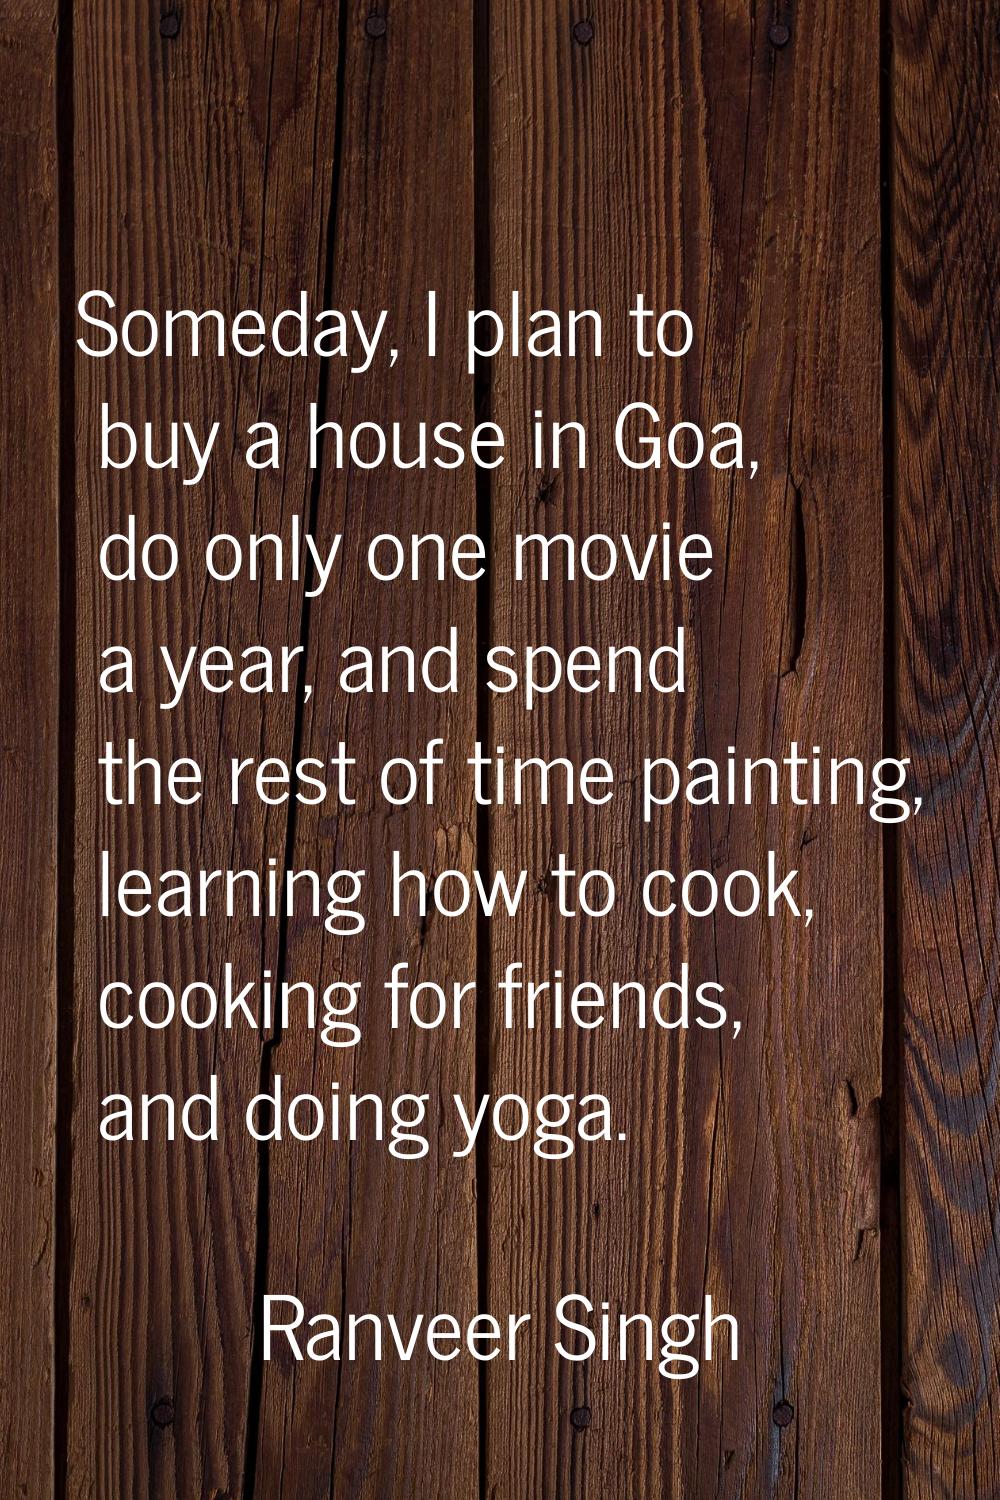 Someday, I plan to buy a house in Goa, do only one movie a year, and spend the rest of time paintin